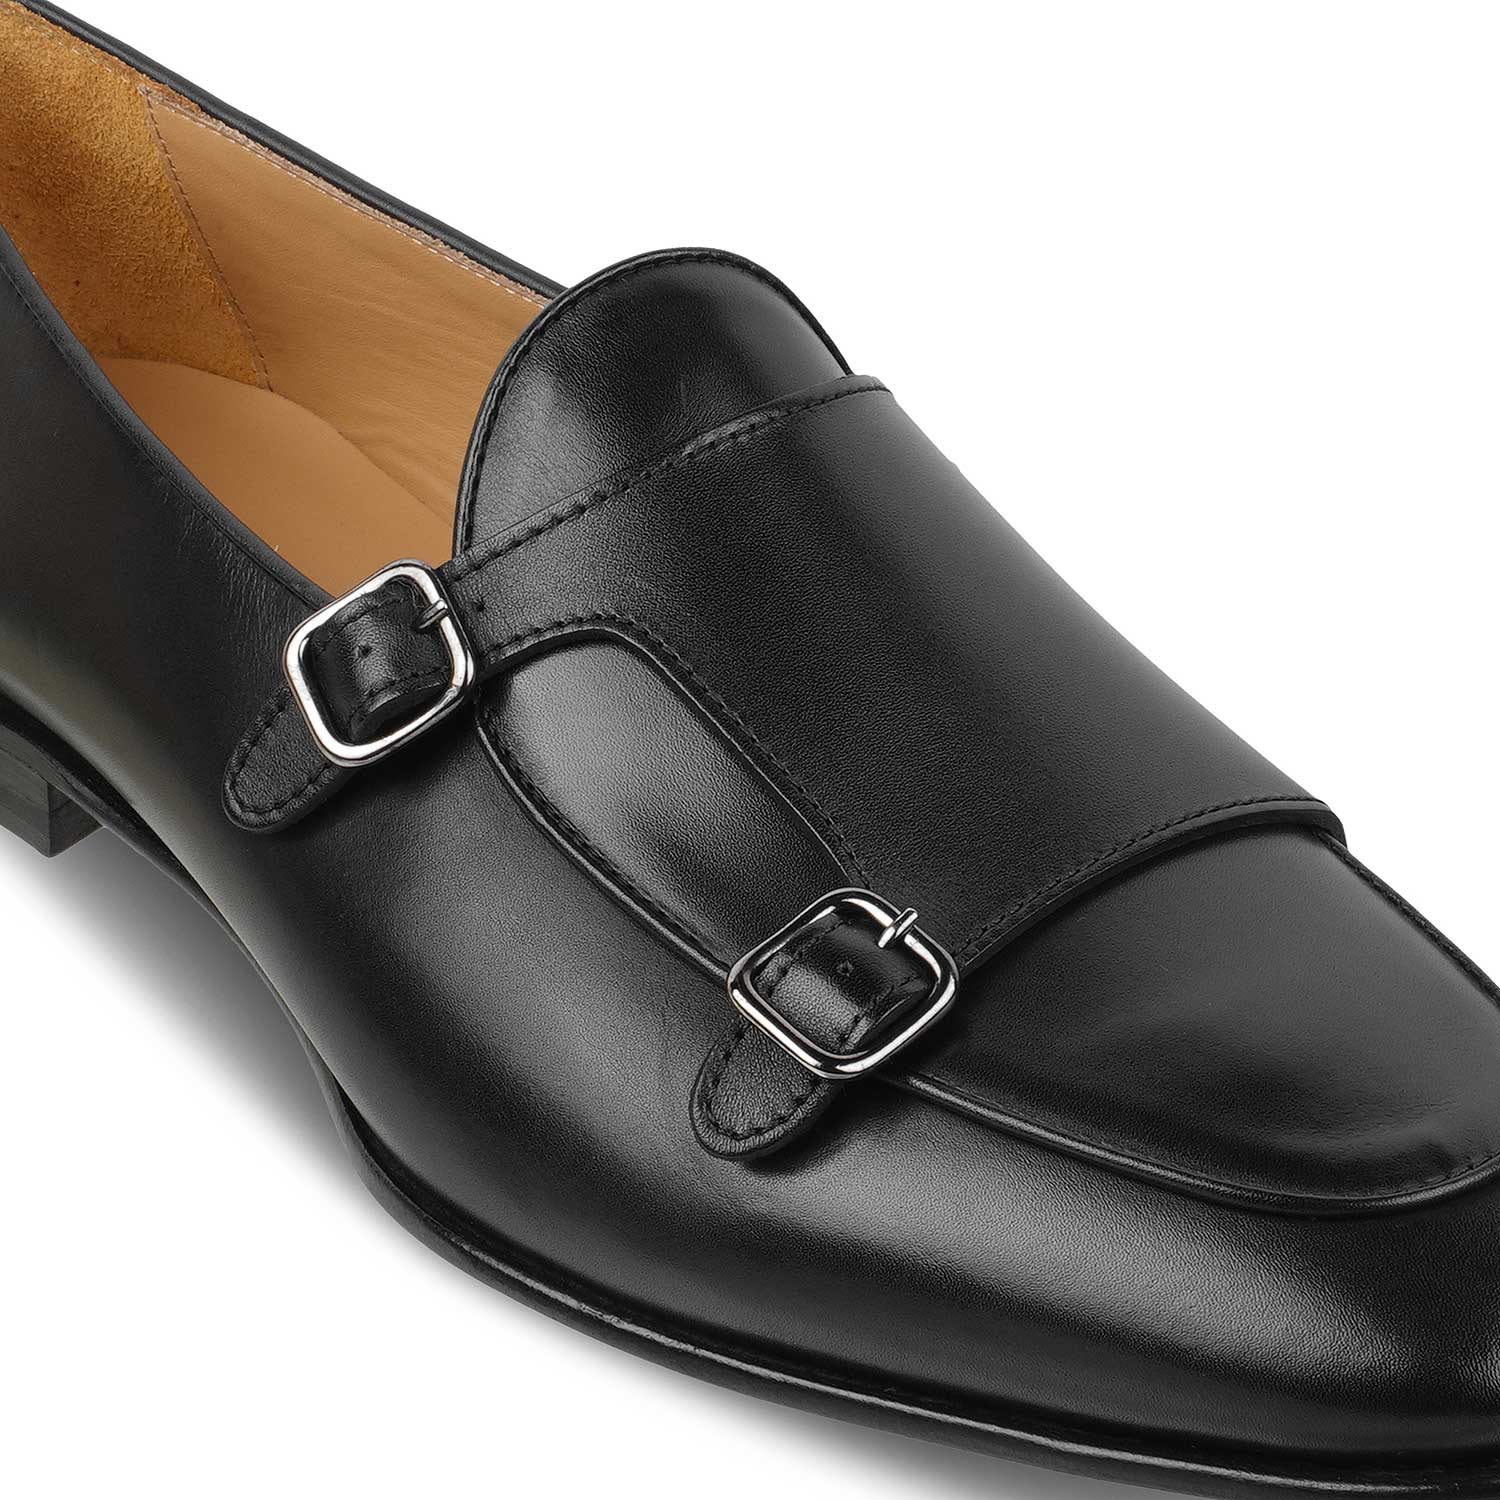 The Maccabeo Black Men's Handcrafted Double Monk Shoes Tresmode - Tresmode